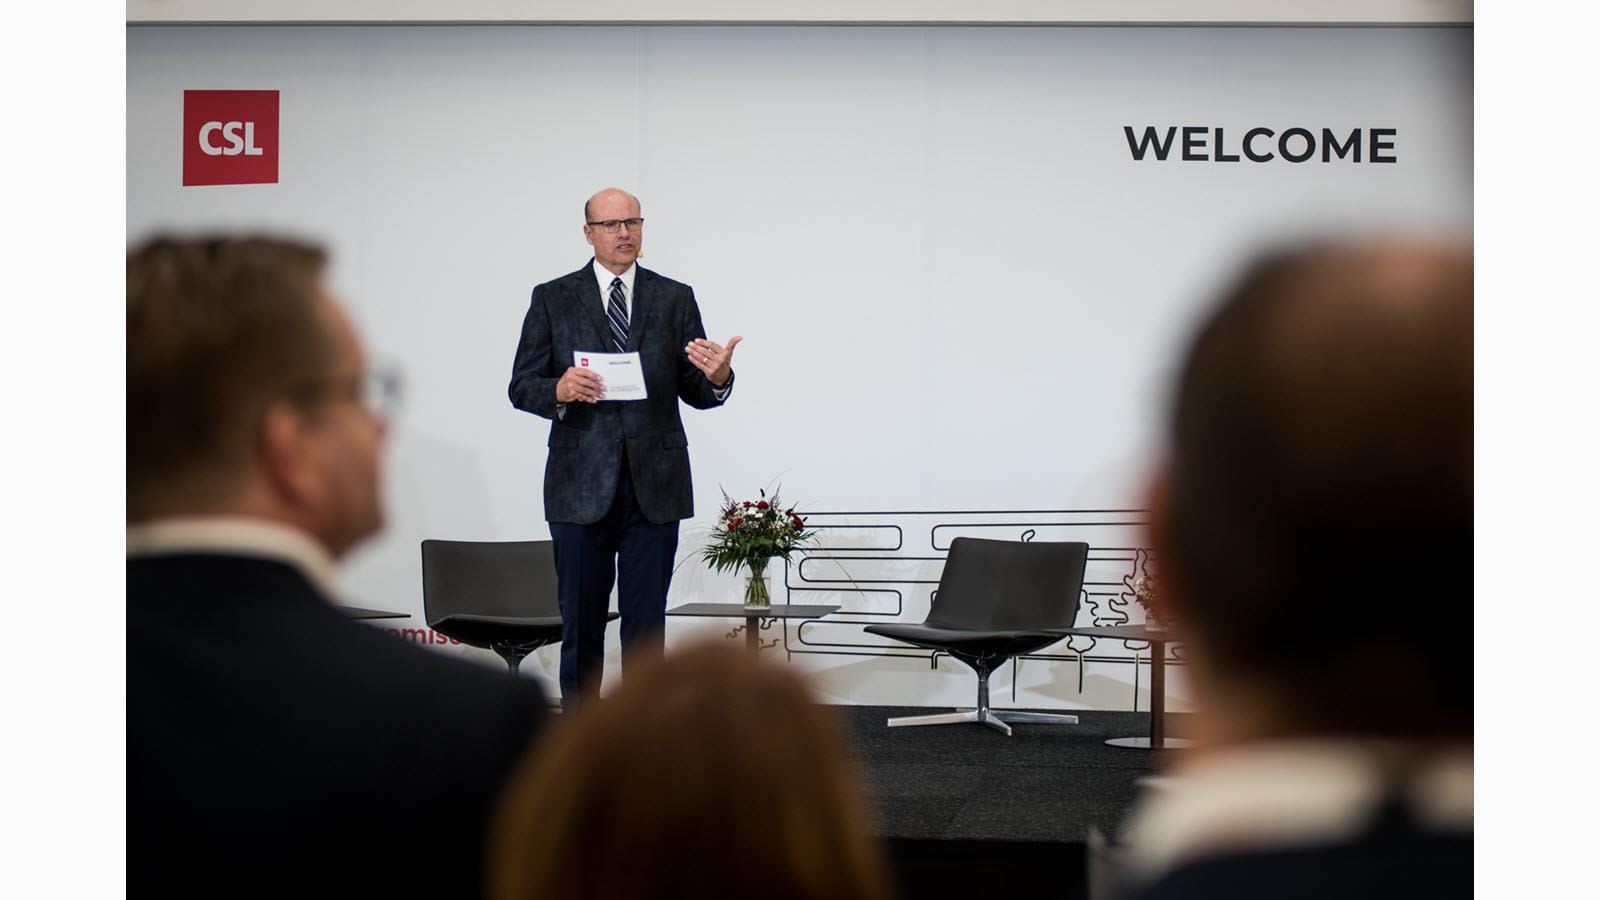 CSL CEO and Managing Director Paul Perreault welcomes visitors to CSL's new R&D campus in Marburg, Germany